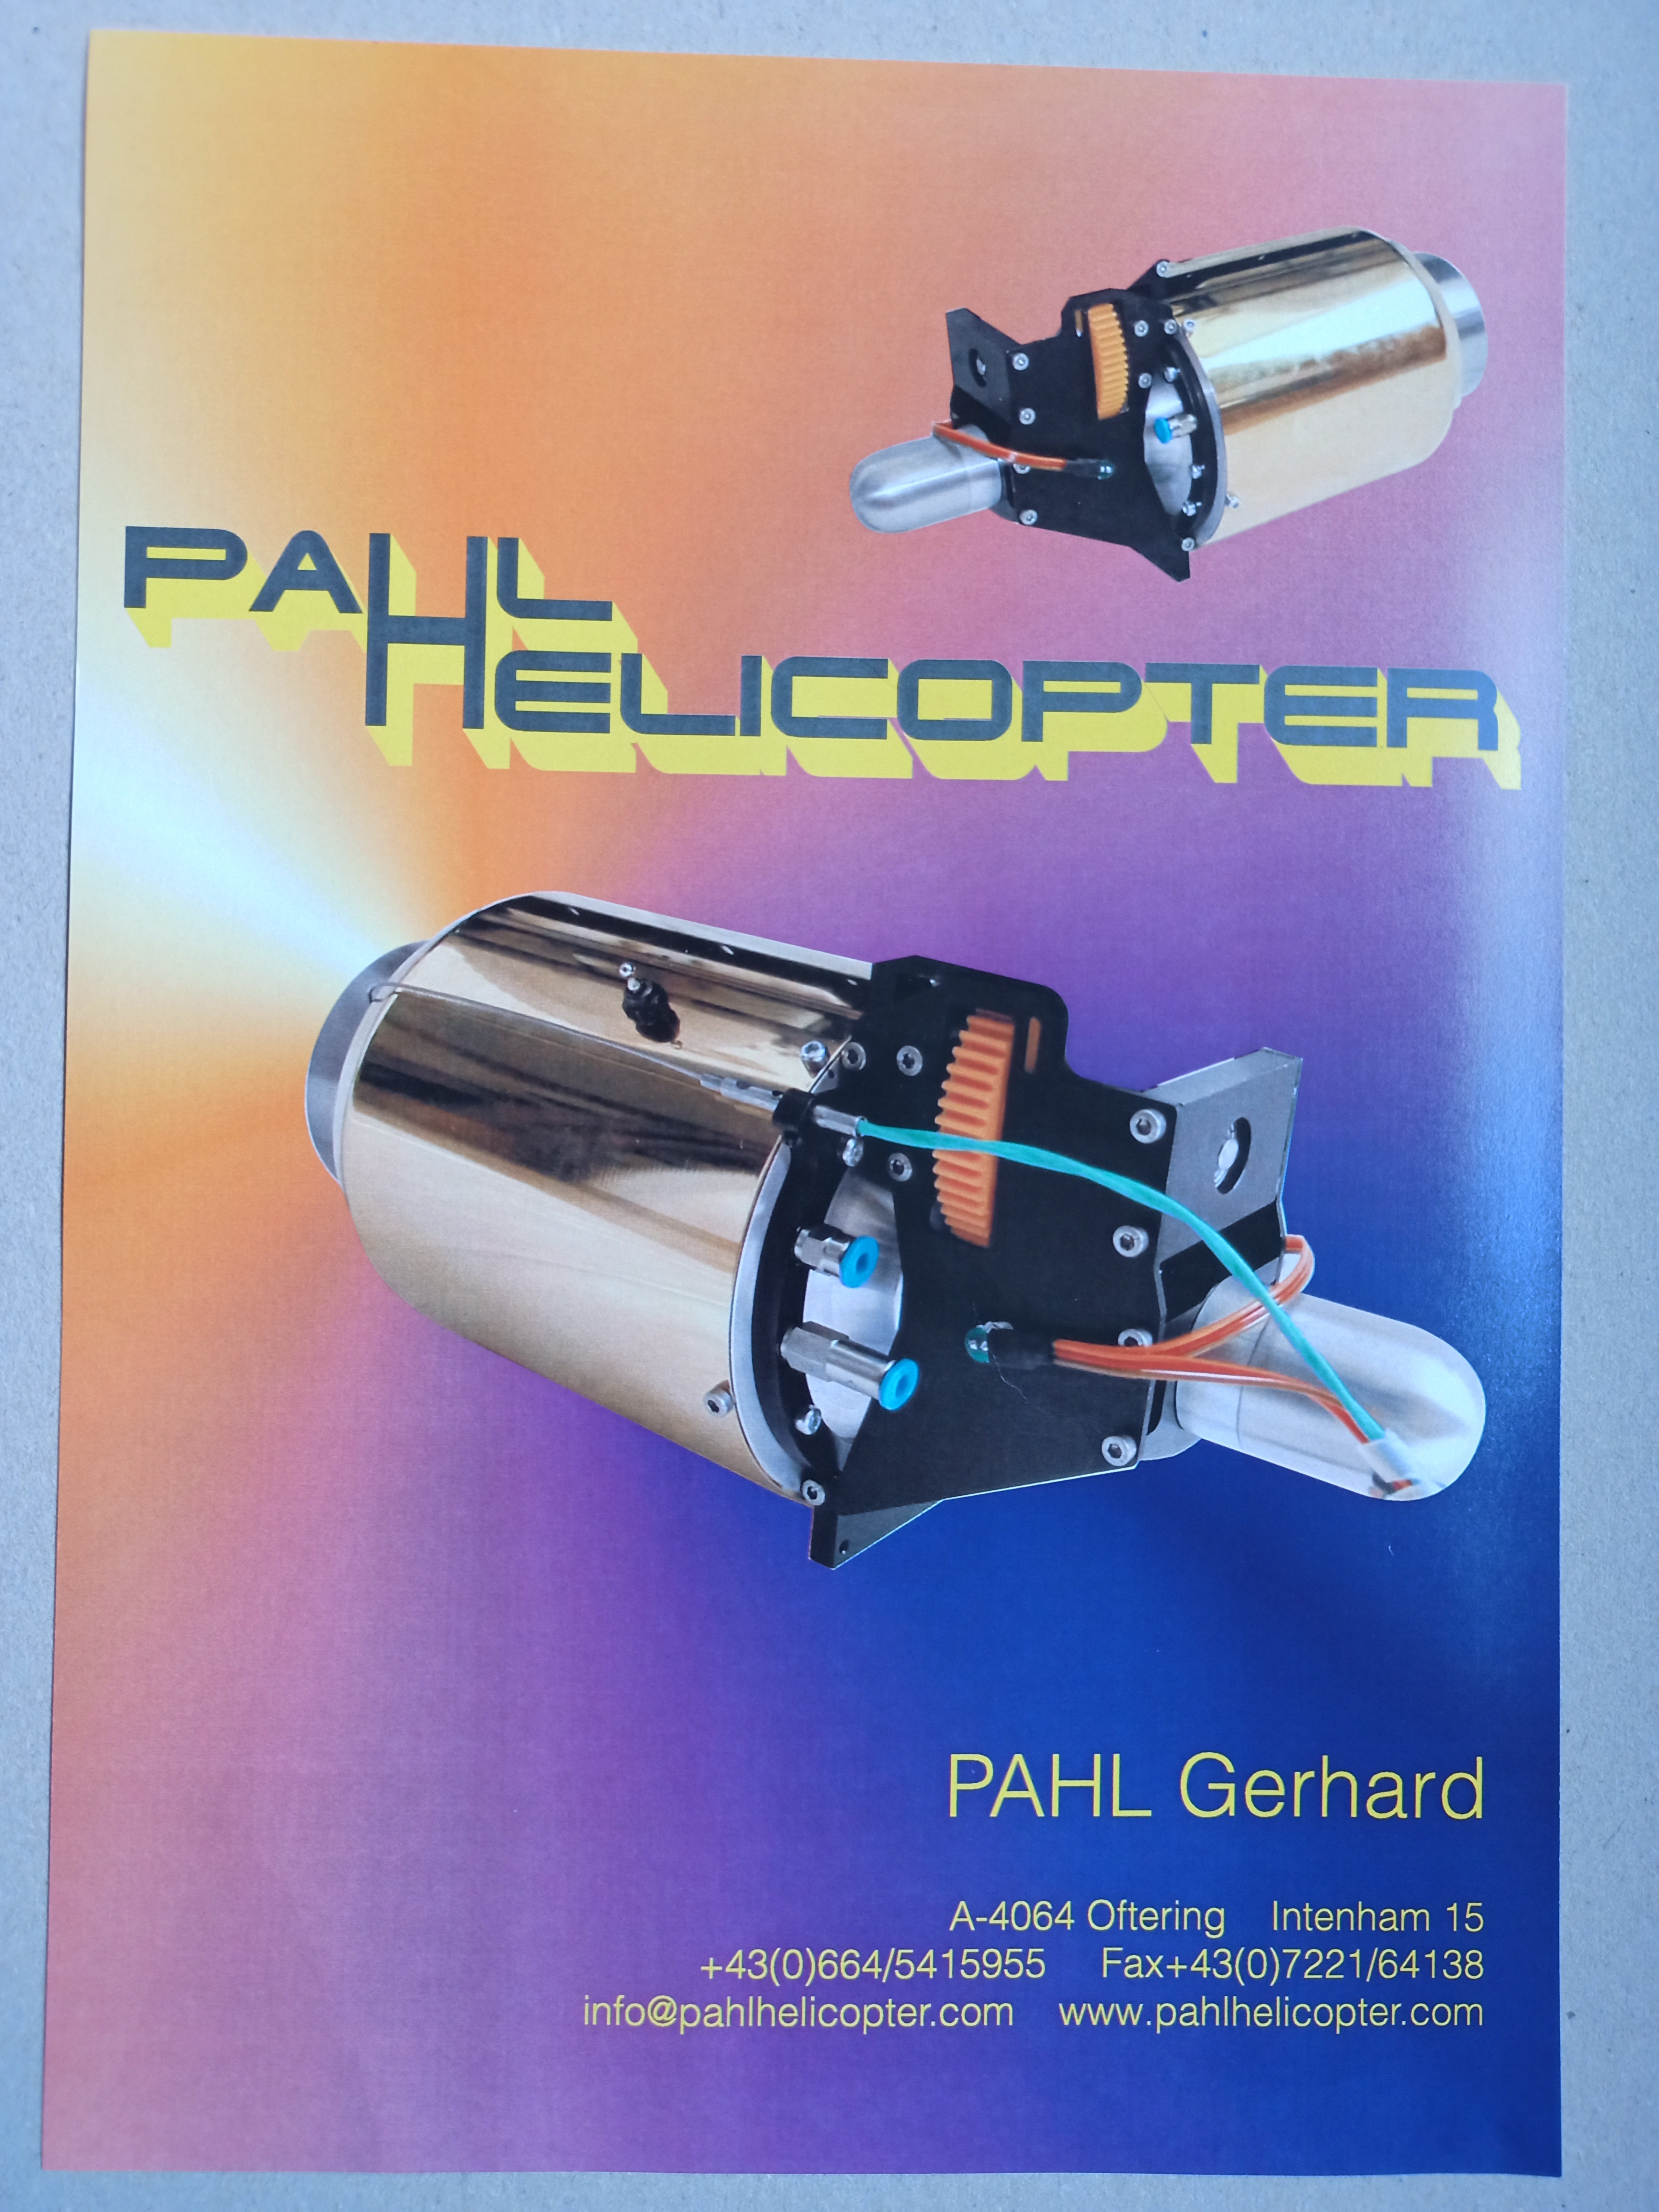 Flyer Pahl Helicopters (Deutsches Segelflugmuseum mit Modellflug CC BY-NC-SA)